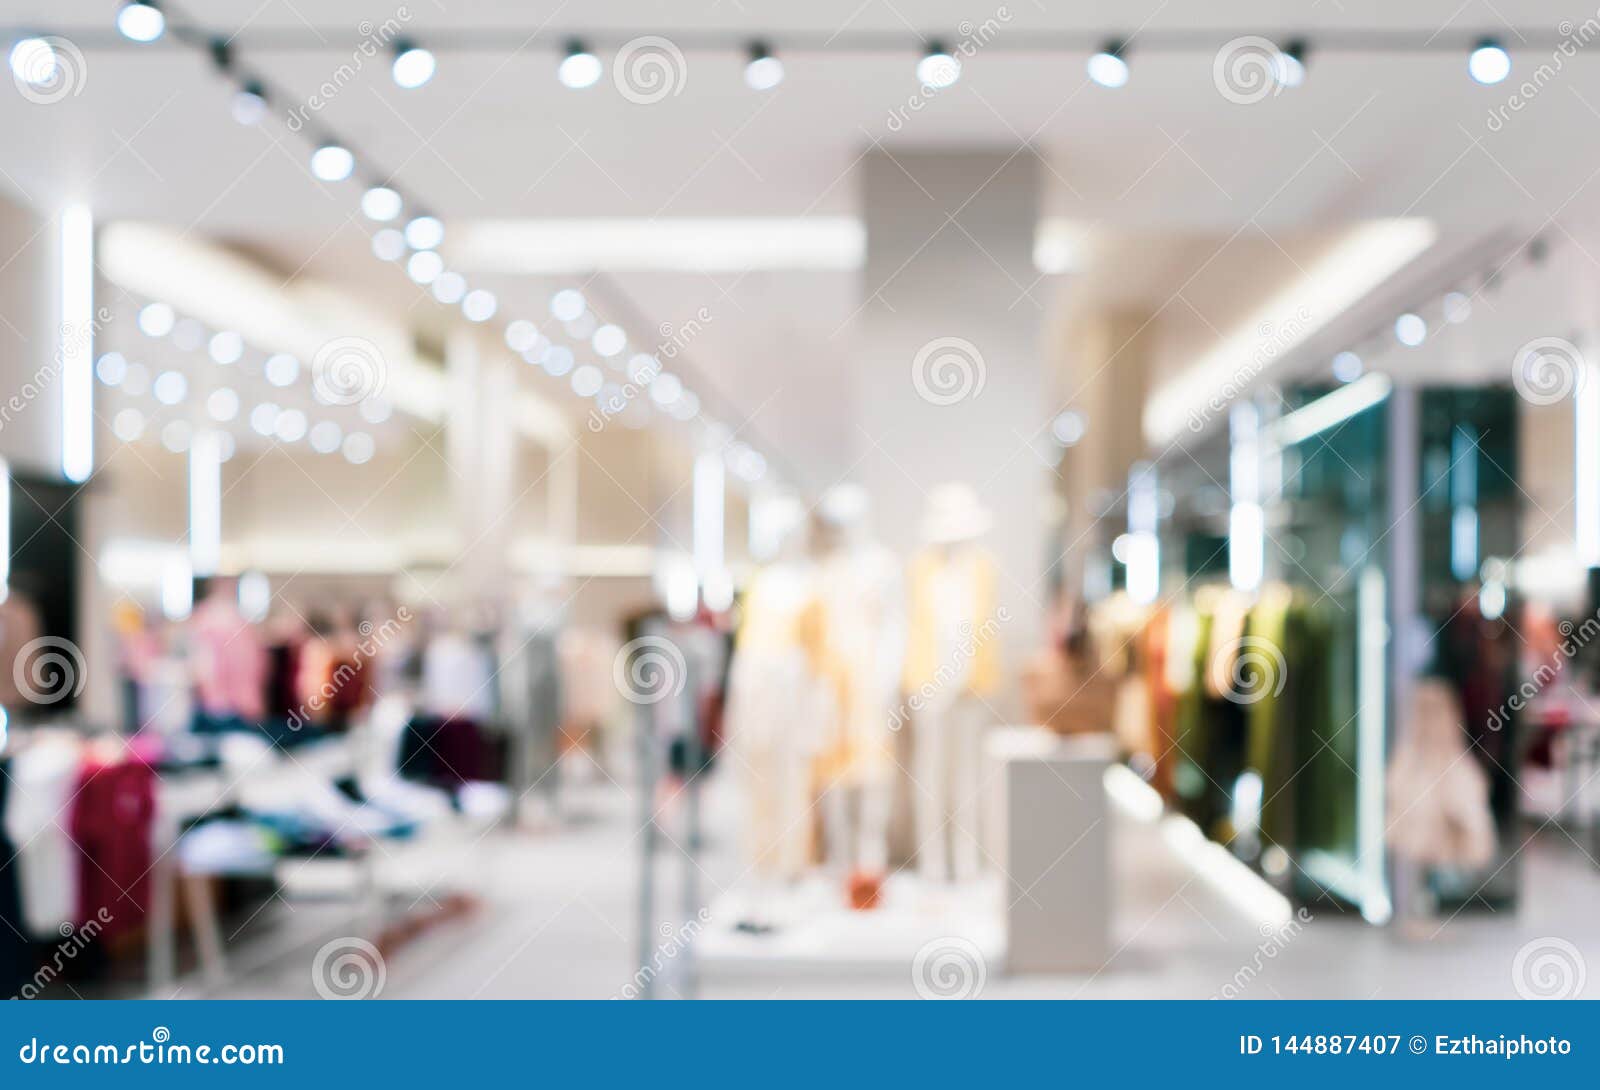 abstract blurred of fashion clothes shop boutique interior in shopping mall, with bokeh light background. blurred image of